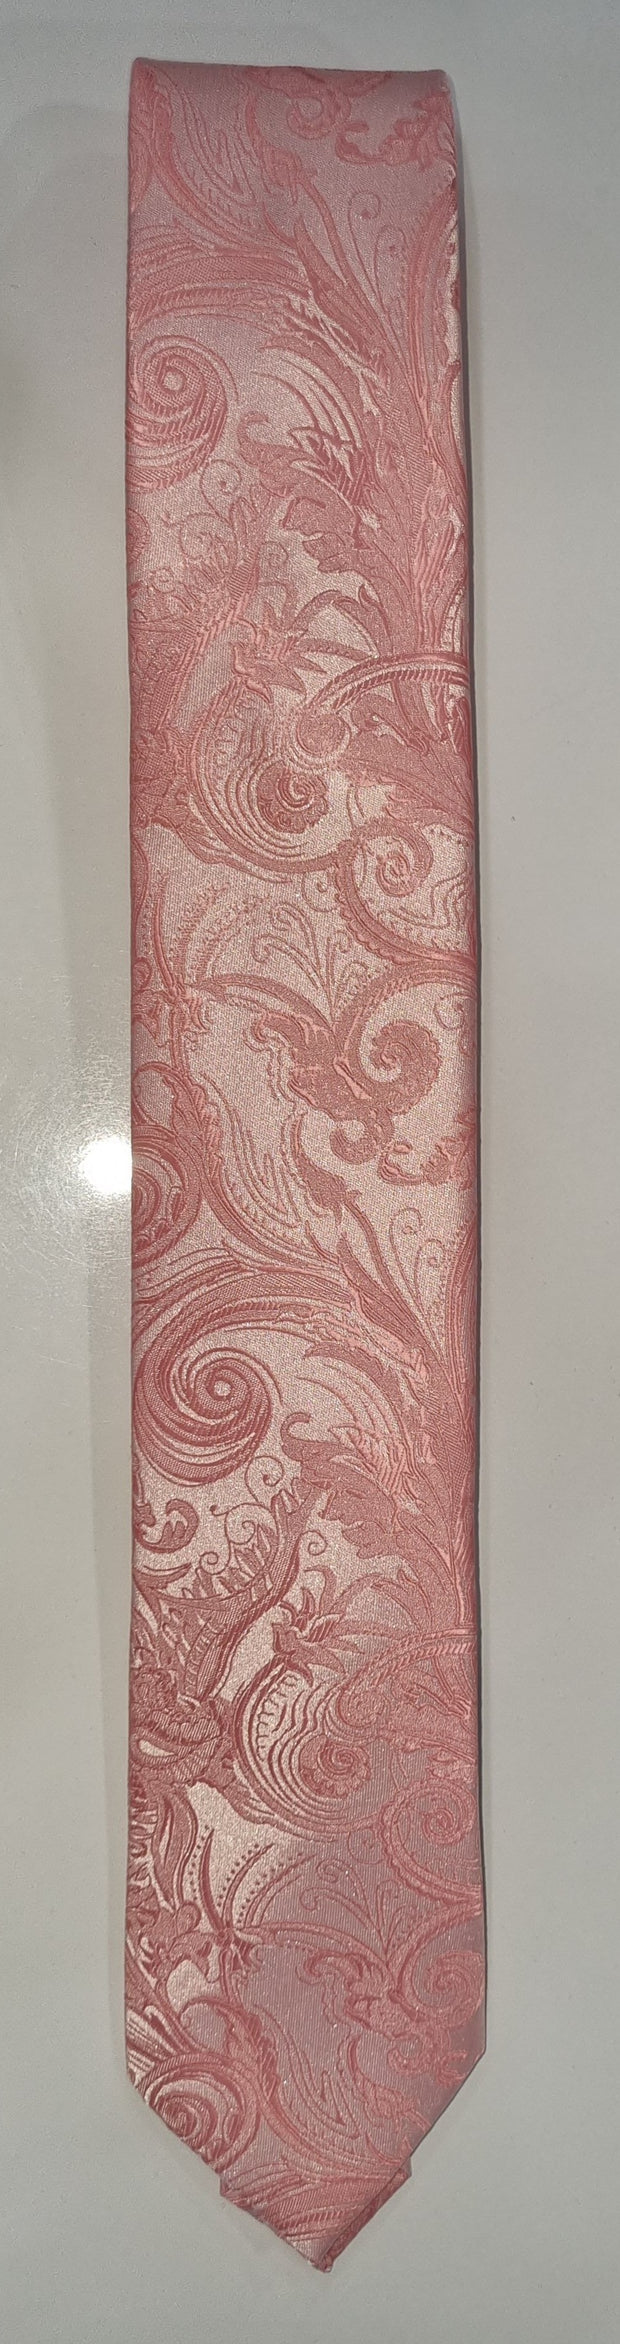 Paisley Pattern Coral